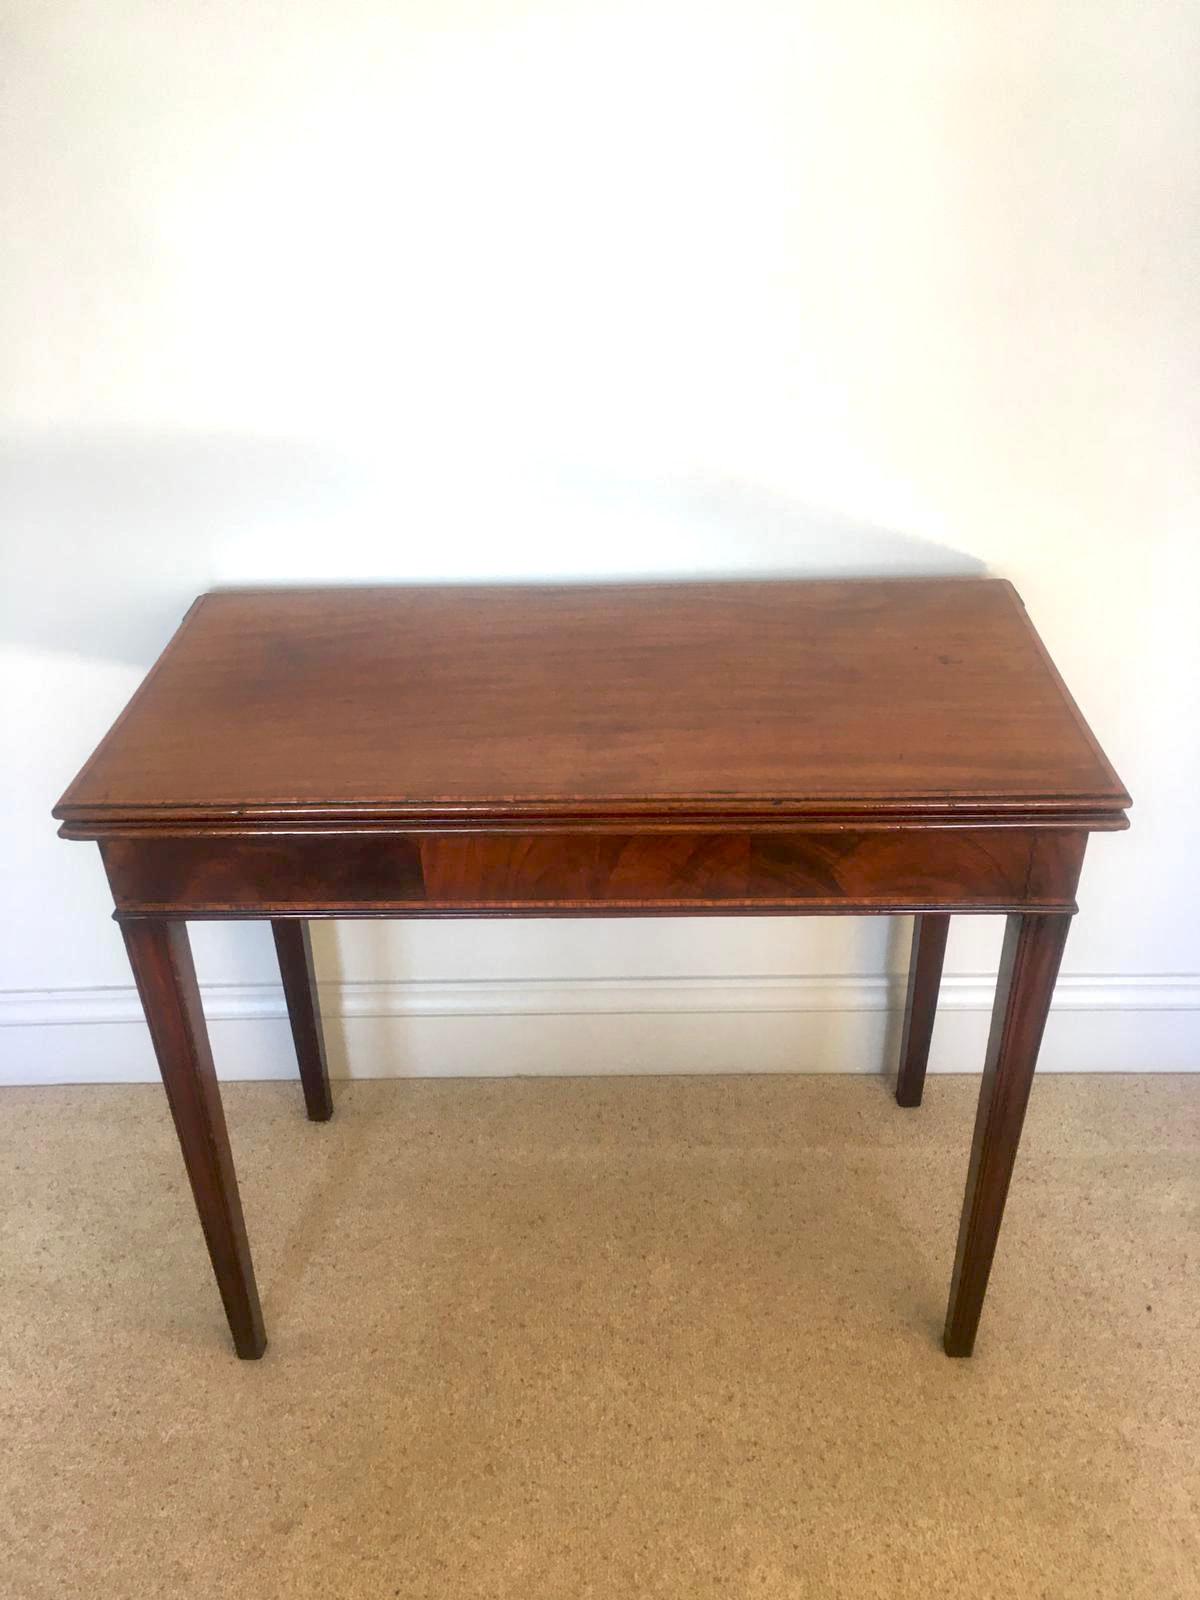 Other Antique George III Mahogany Inlaid Tea Table For Sale